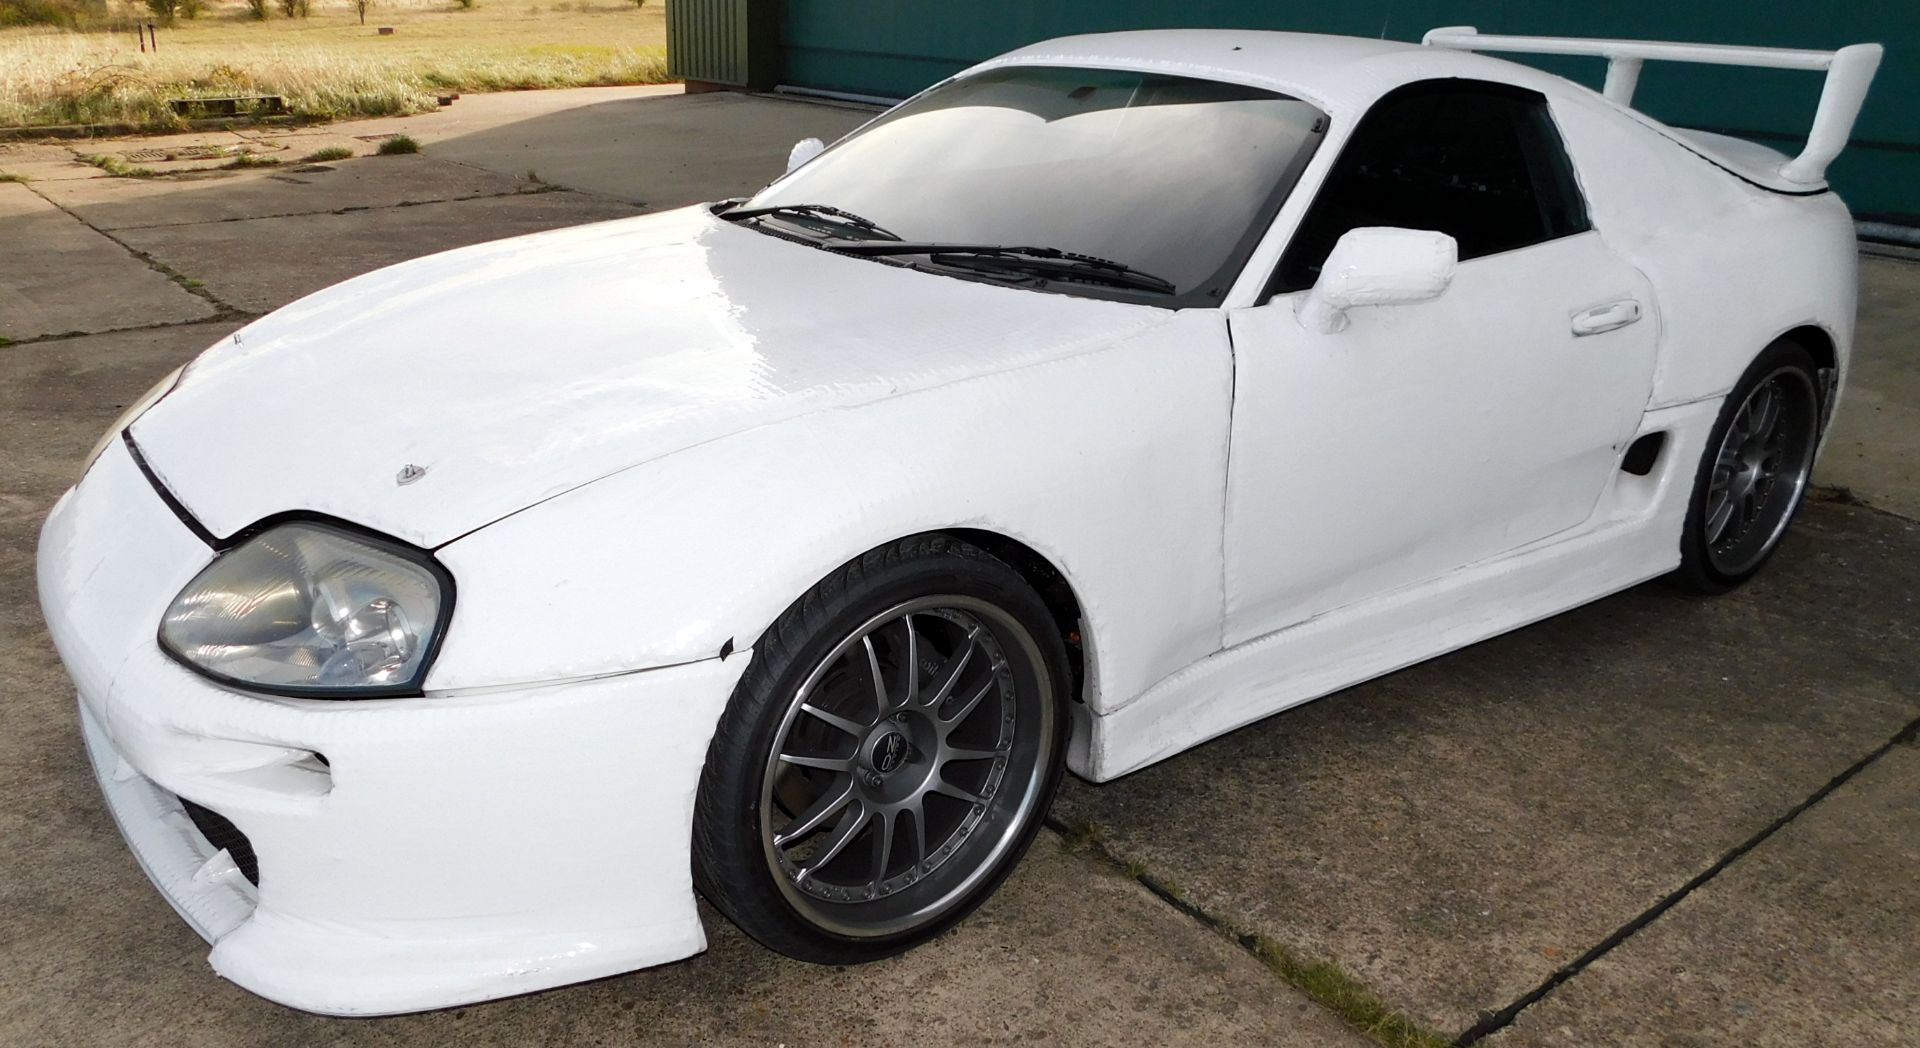 Toyota Supra RHD 2 Door Coupe, LED Lighting System Body Coverage, Ford Duratec 2.5 4 Cylinder - Image 5 of 13